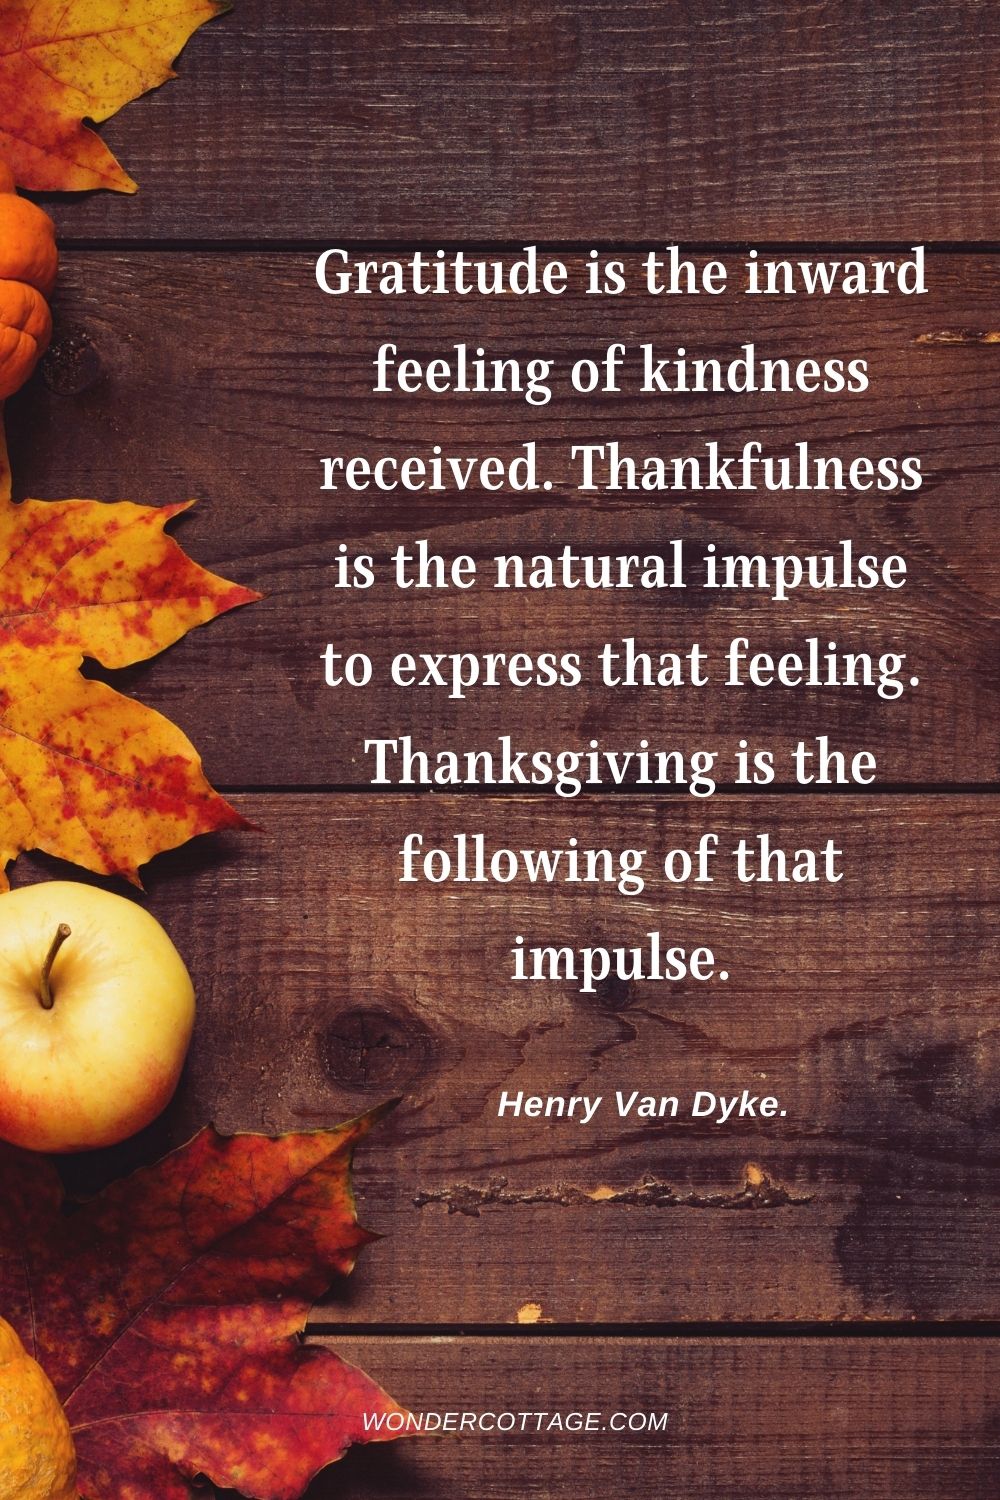 Gratitude is the inward feeling of kindness received. Thankfulness is the natural impulse to express that feeling. Thanksgiving is the following of that impulse. Henry Van Dyke.